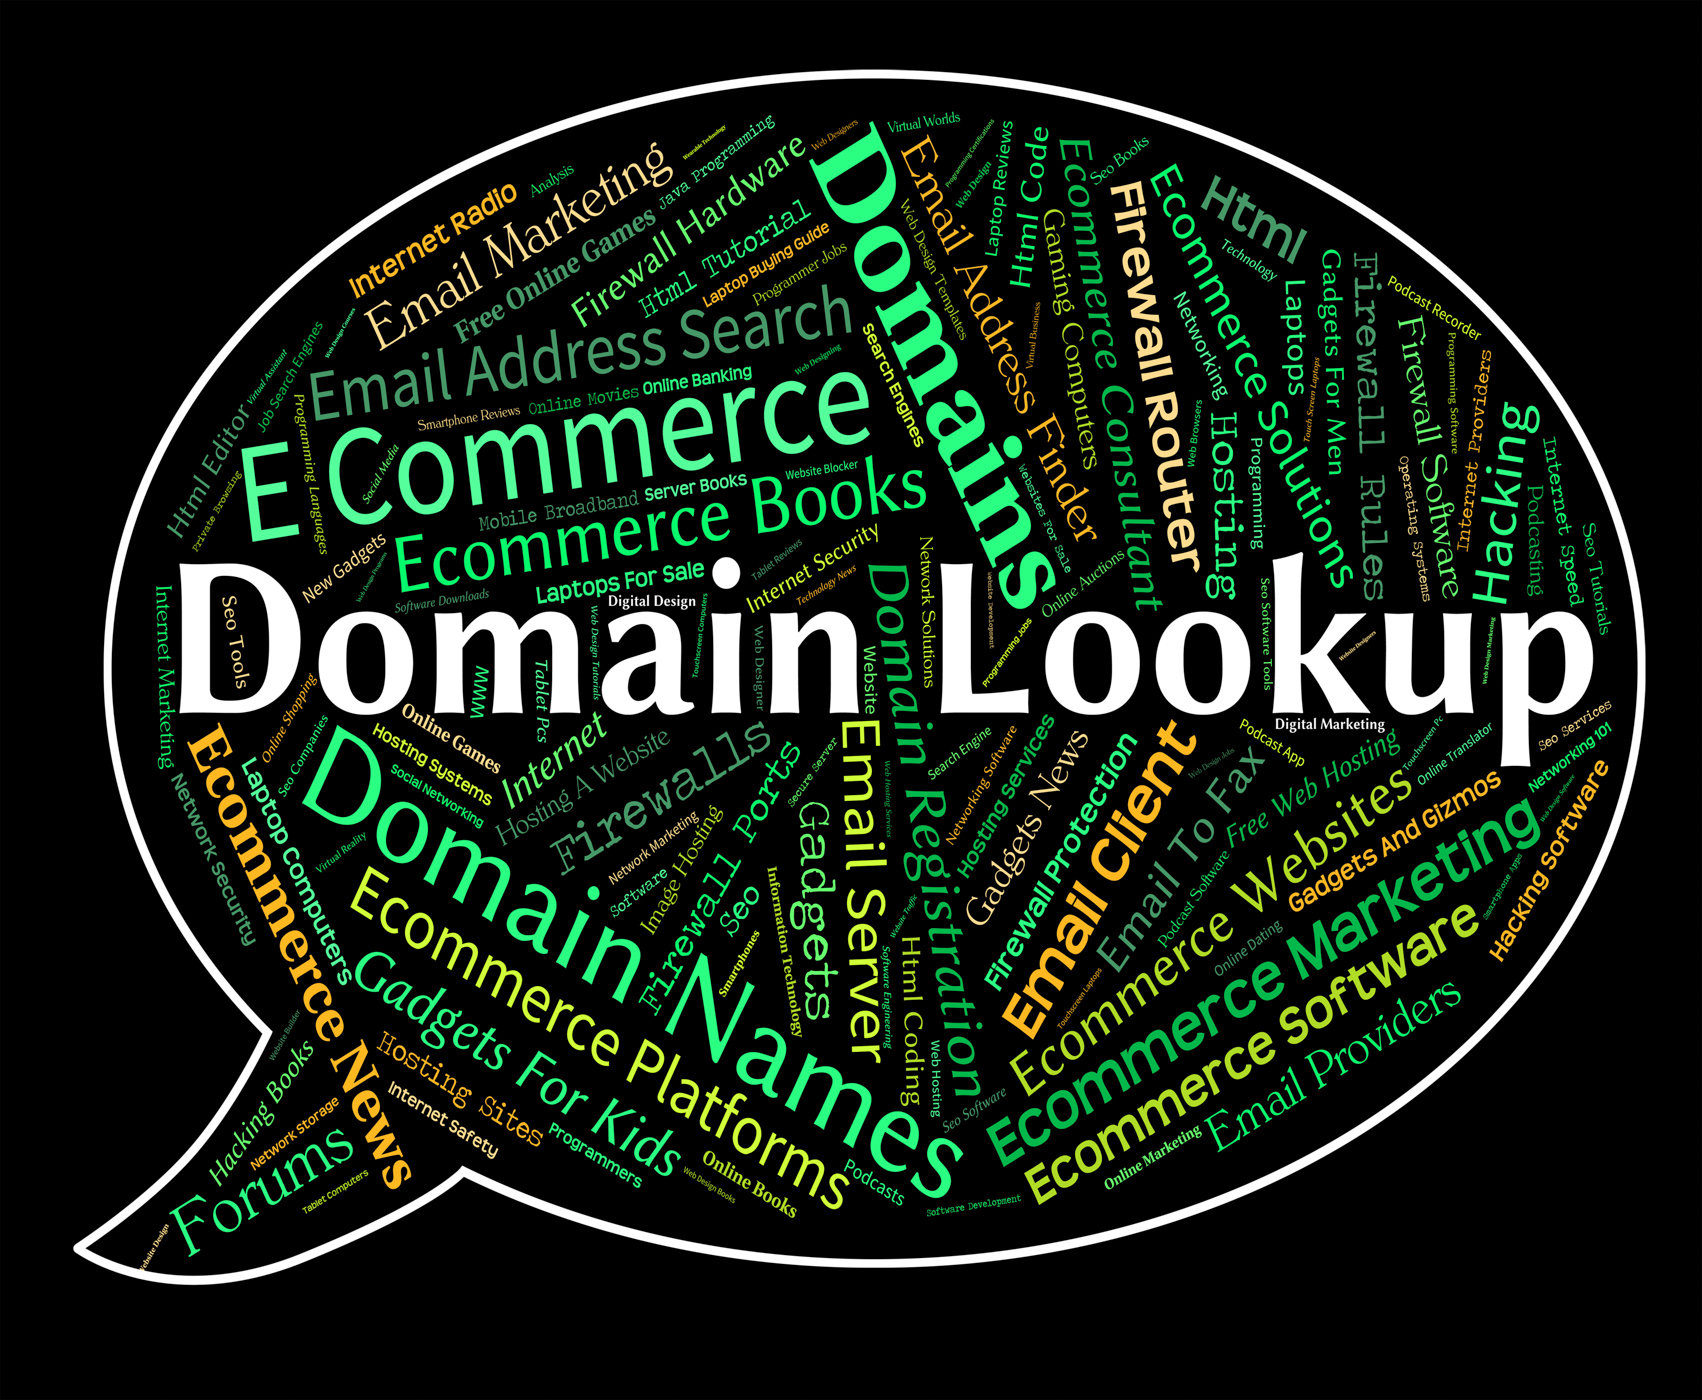 Domain lookup means researcher dominion and search photo